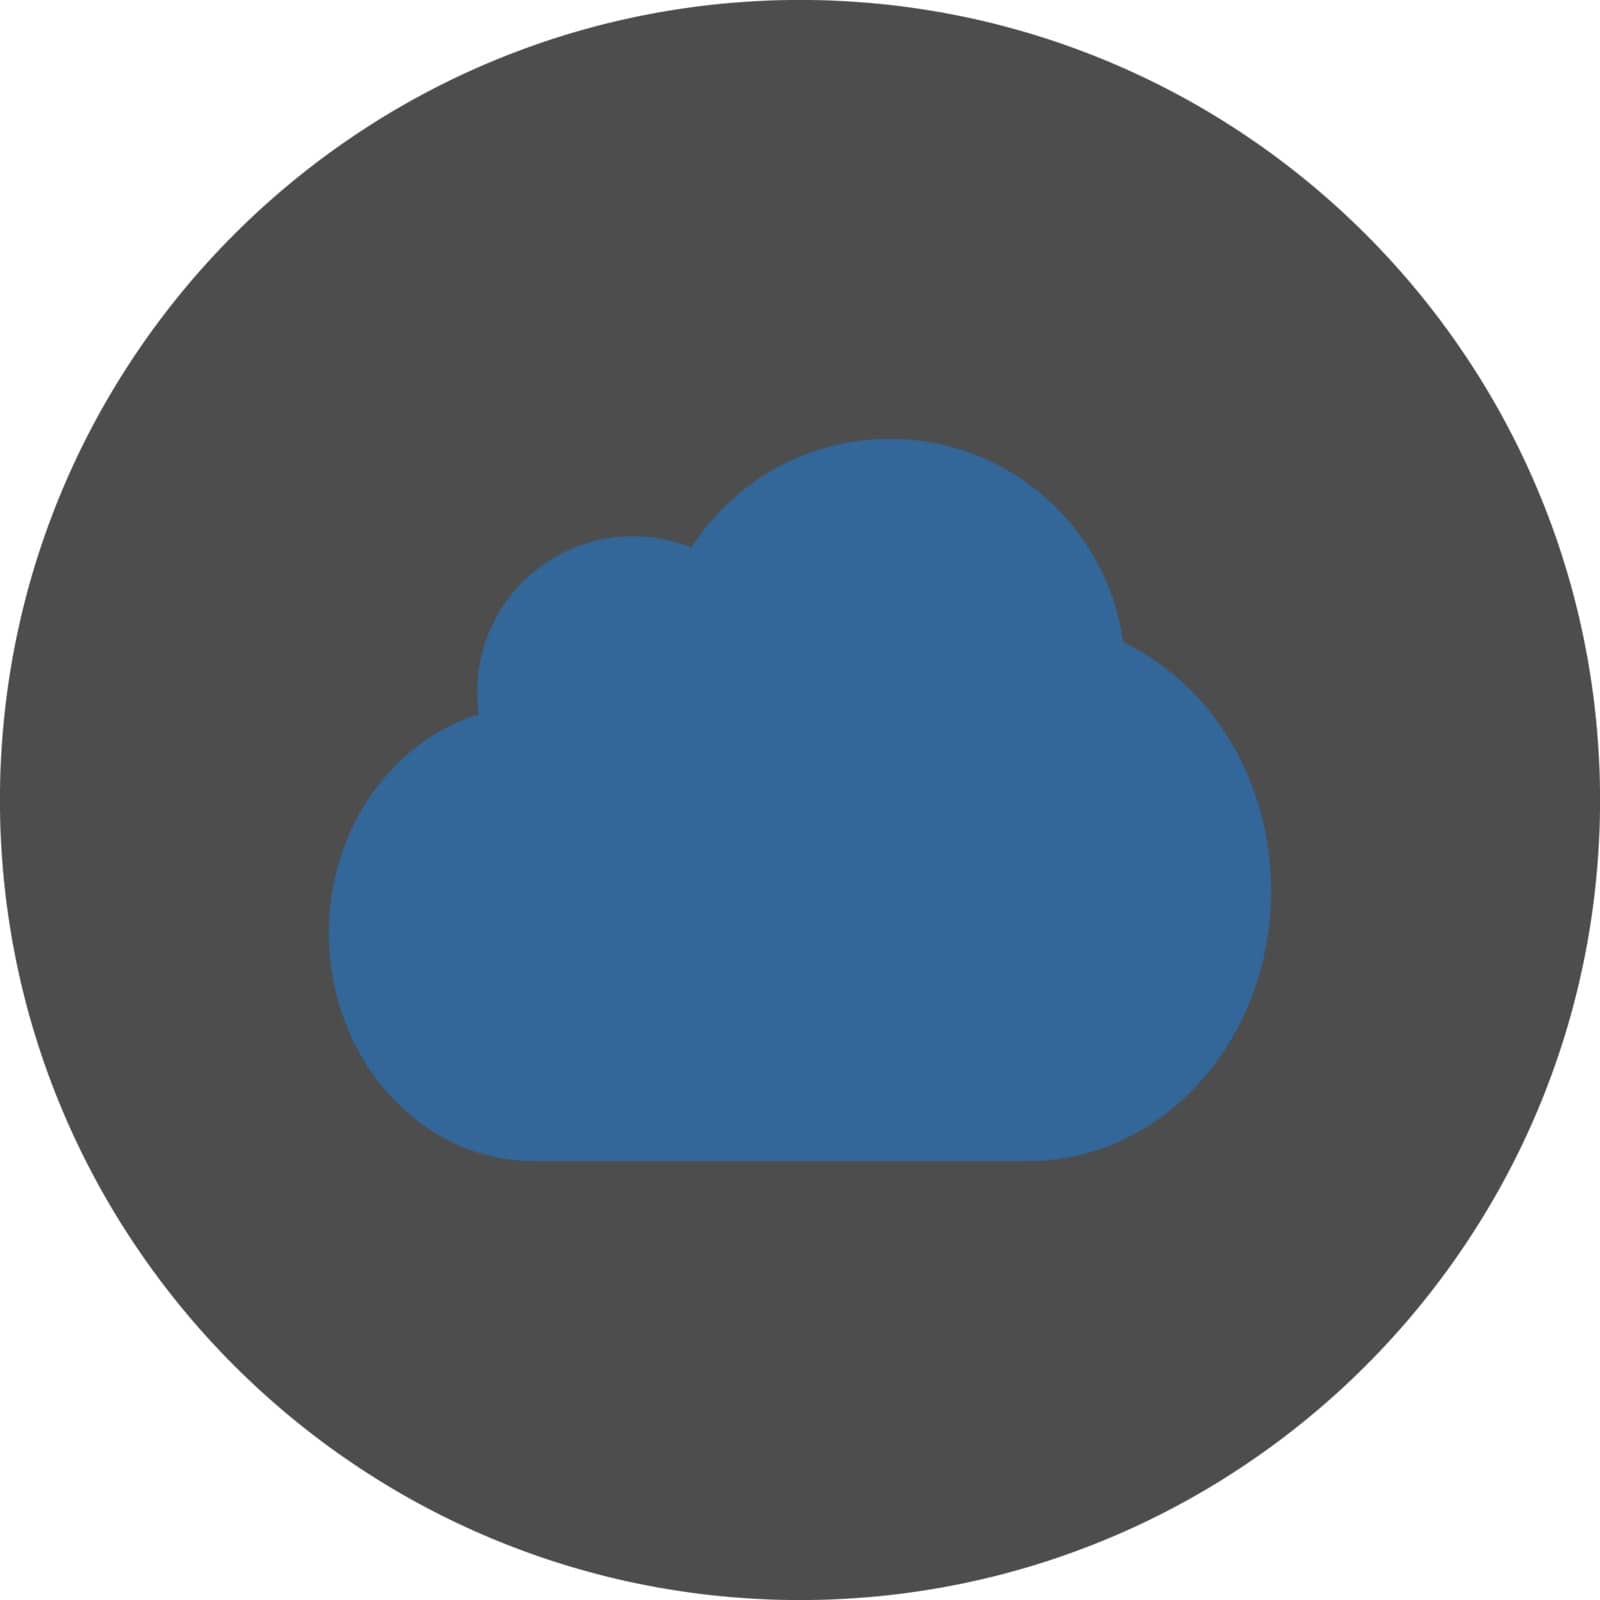 Cloud icon. This round flat button is drawn with cobalt and gray colors on a white background.